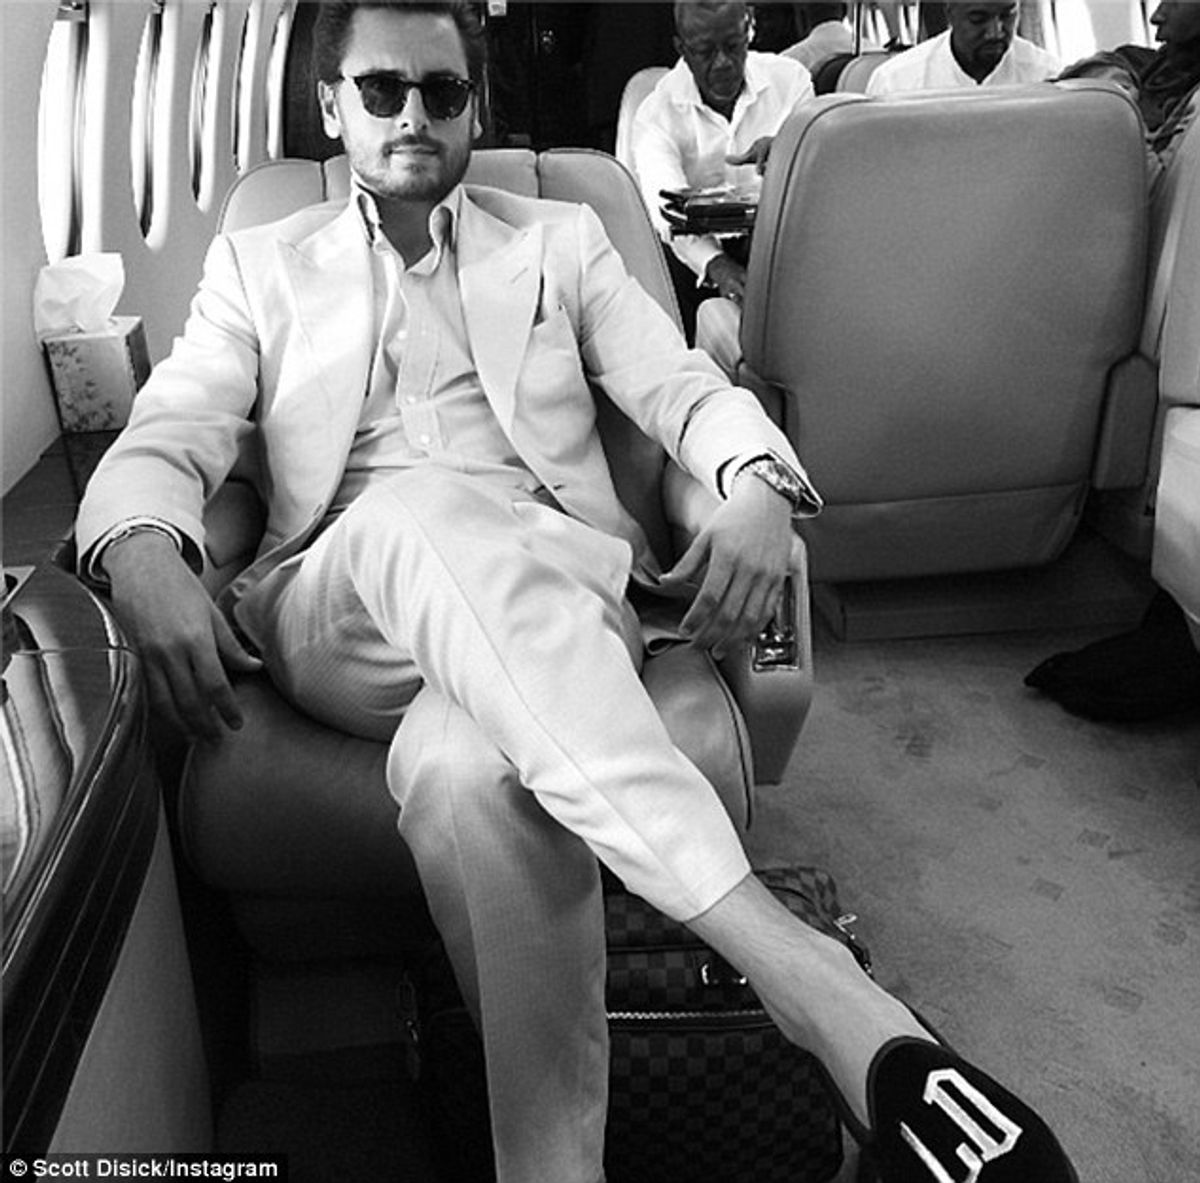 Finals as Told by Scott Disick